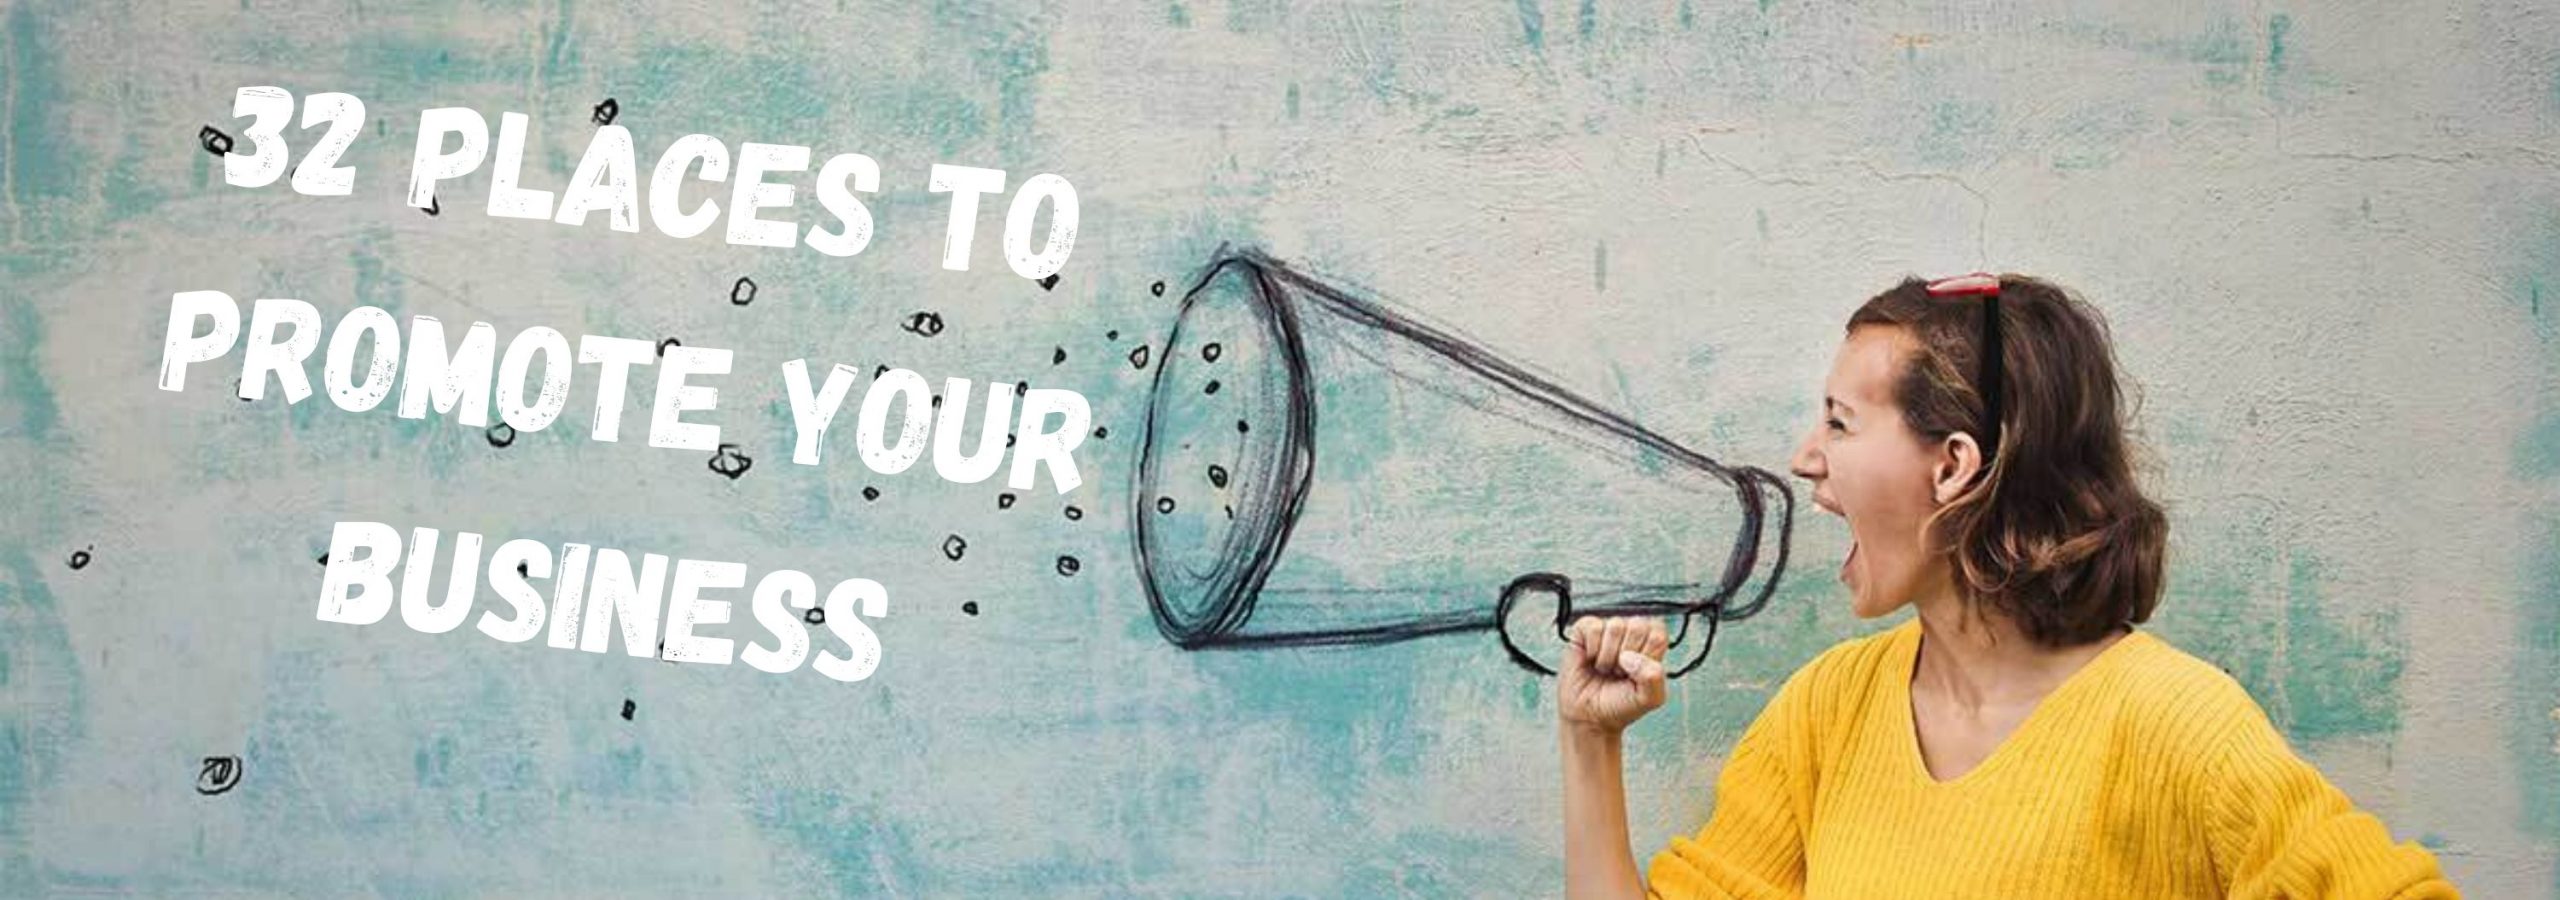 32 Places To Promote Your Business banner